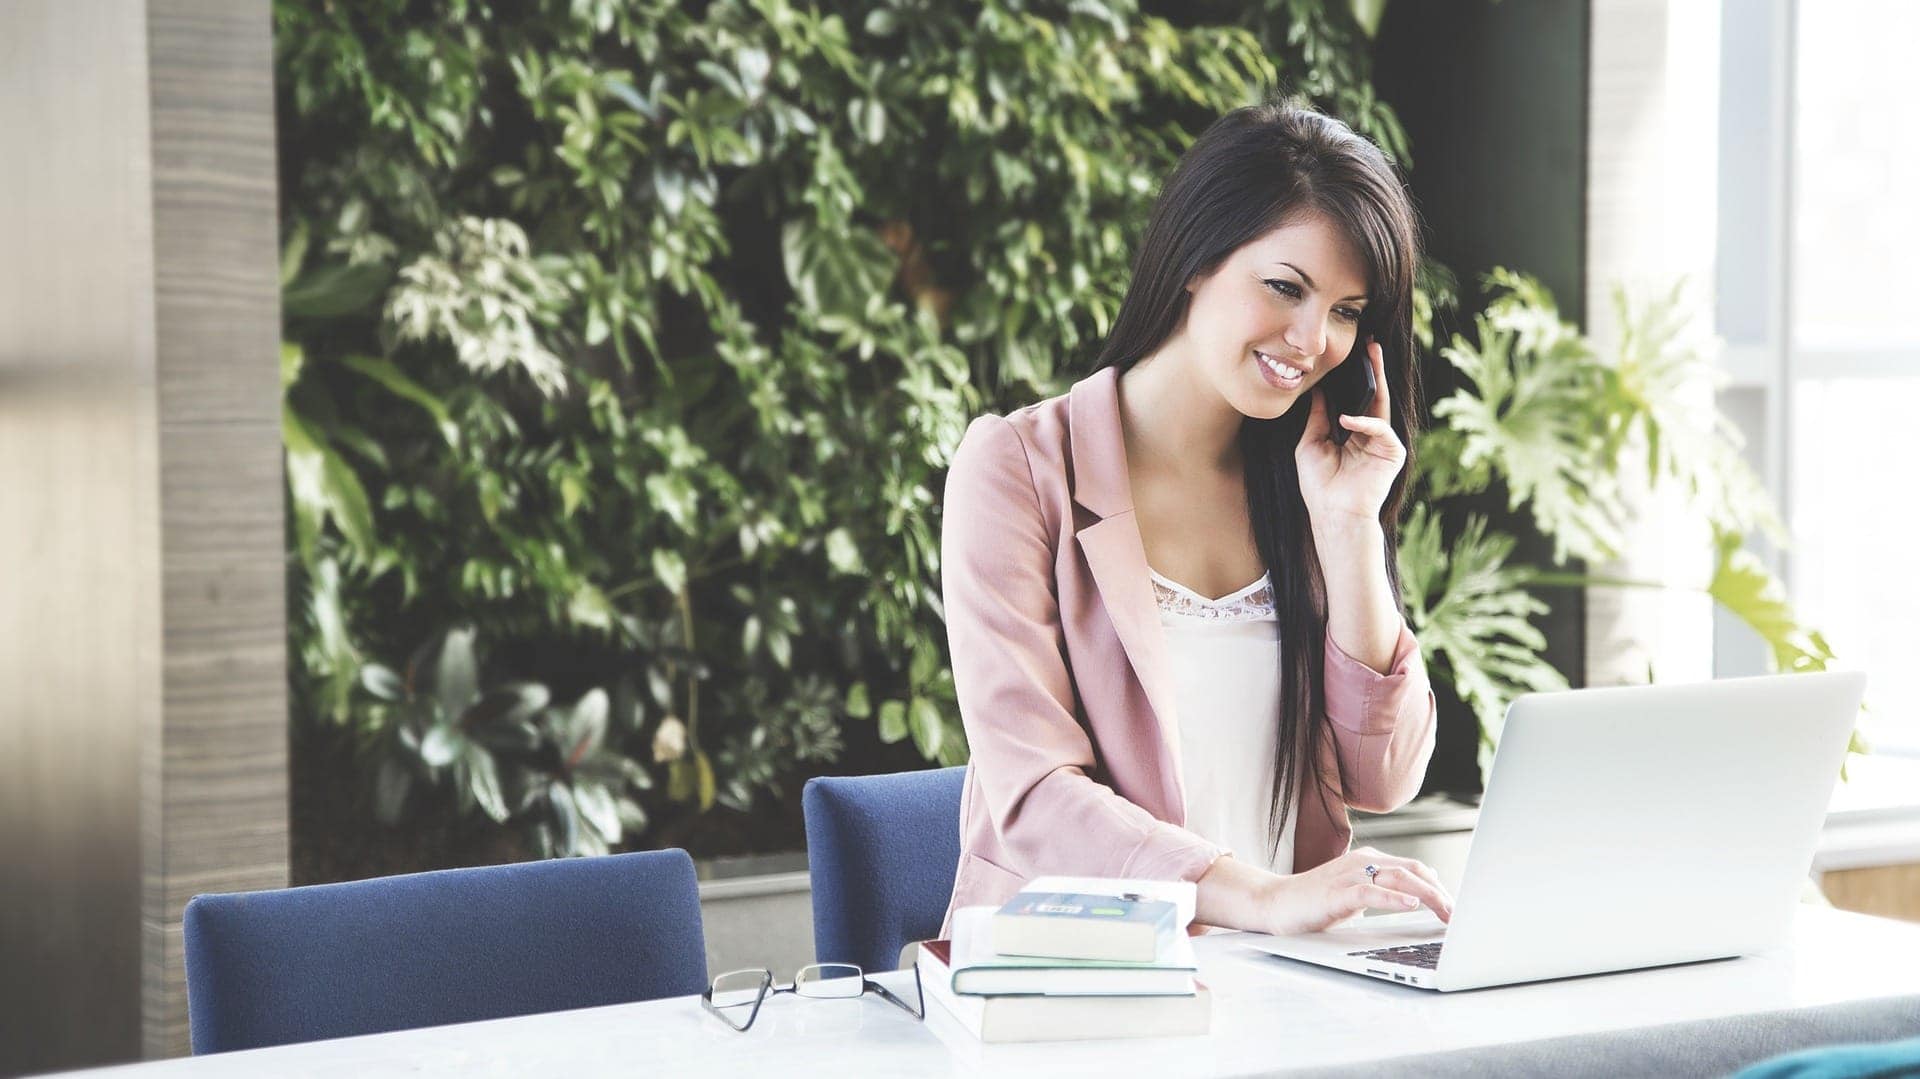 How Financial Services Can Provide a Superior Customer Experience With UniVoIP